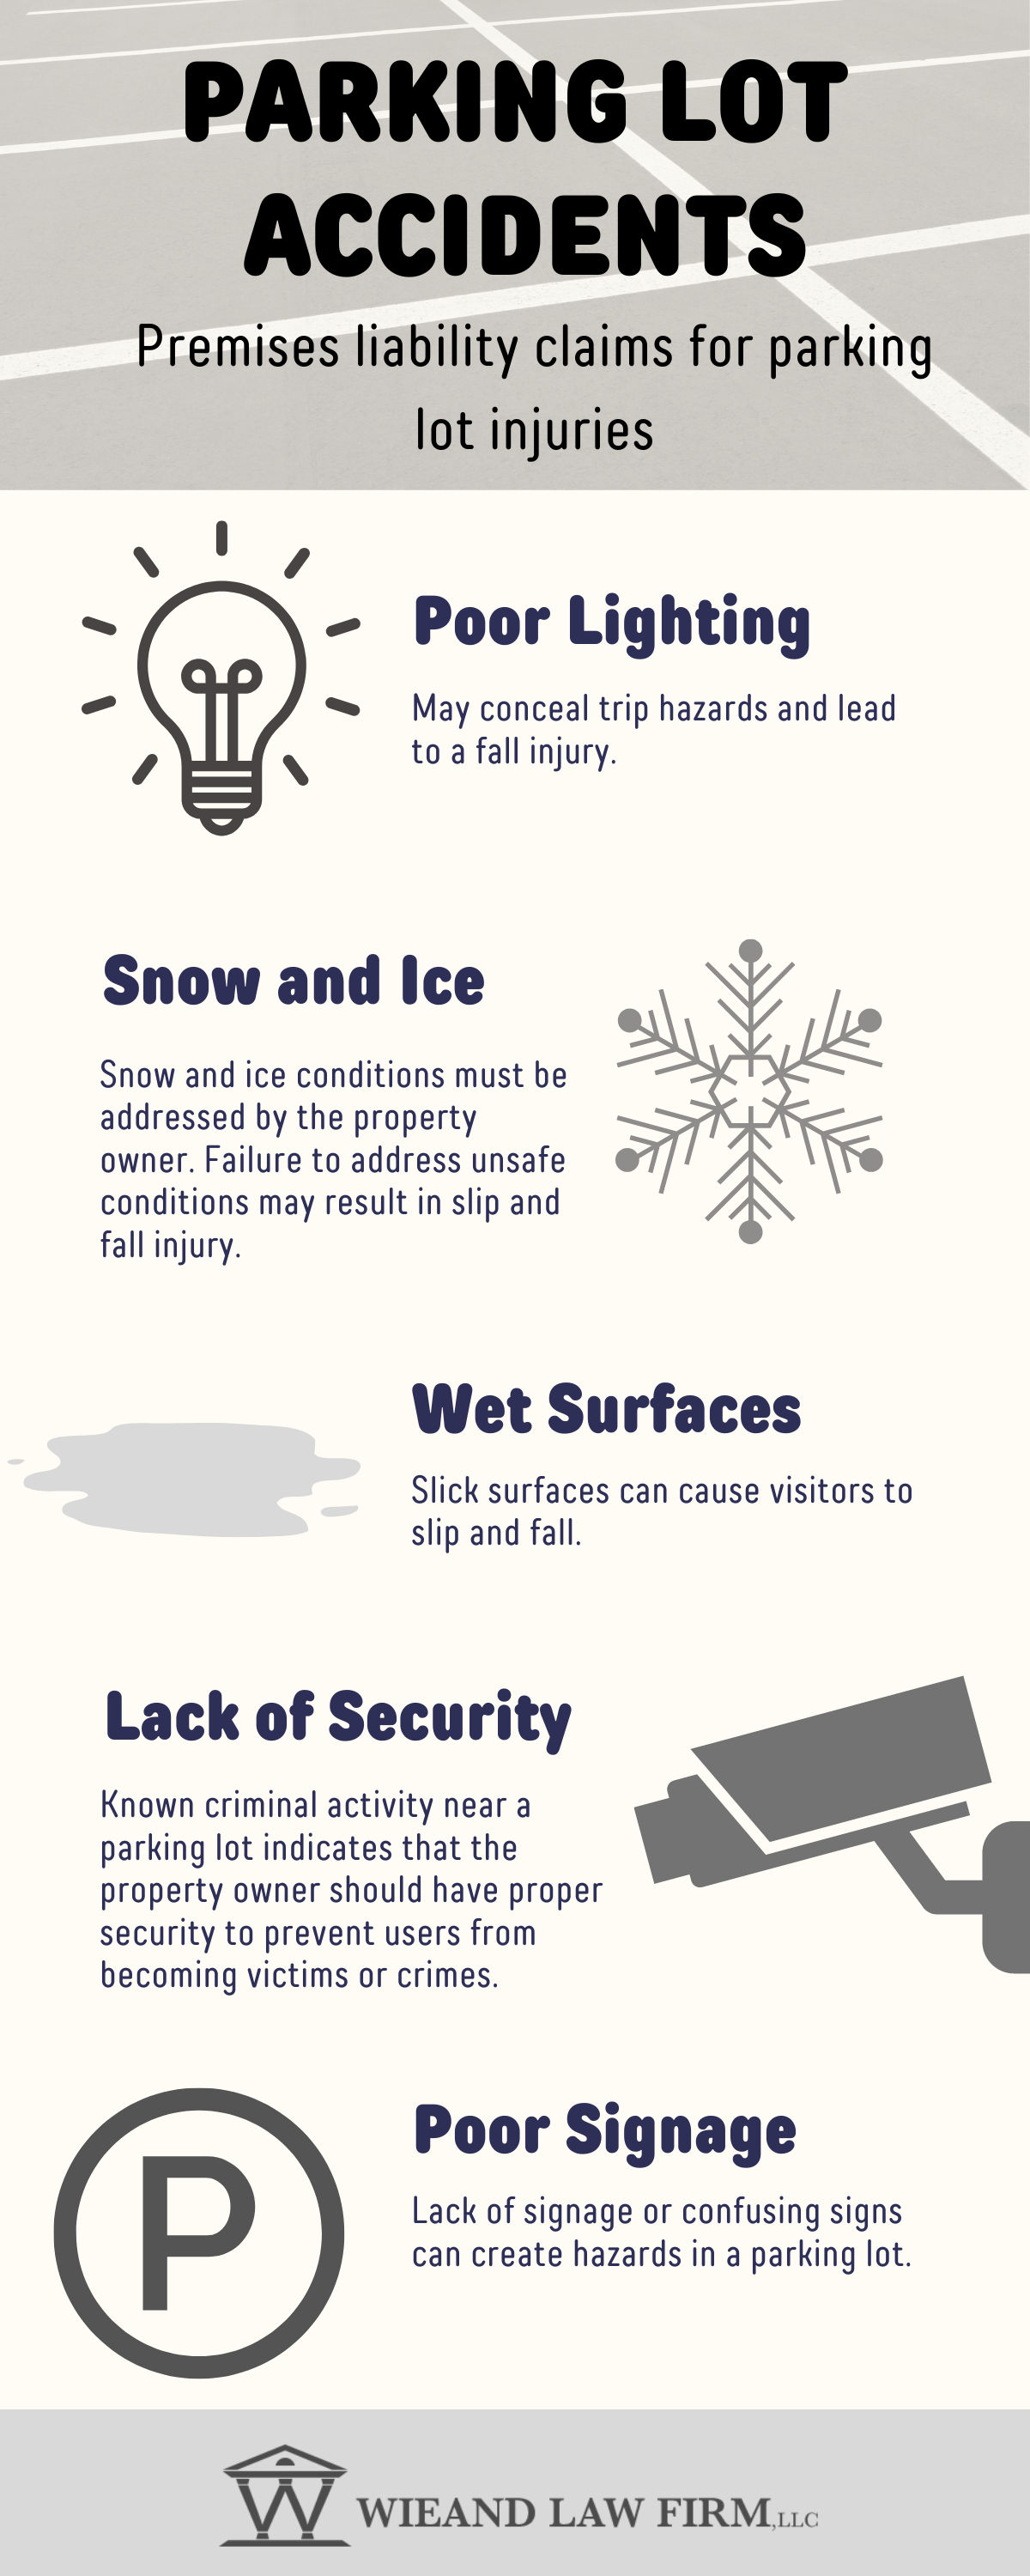 parking lot accidents infographic